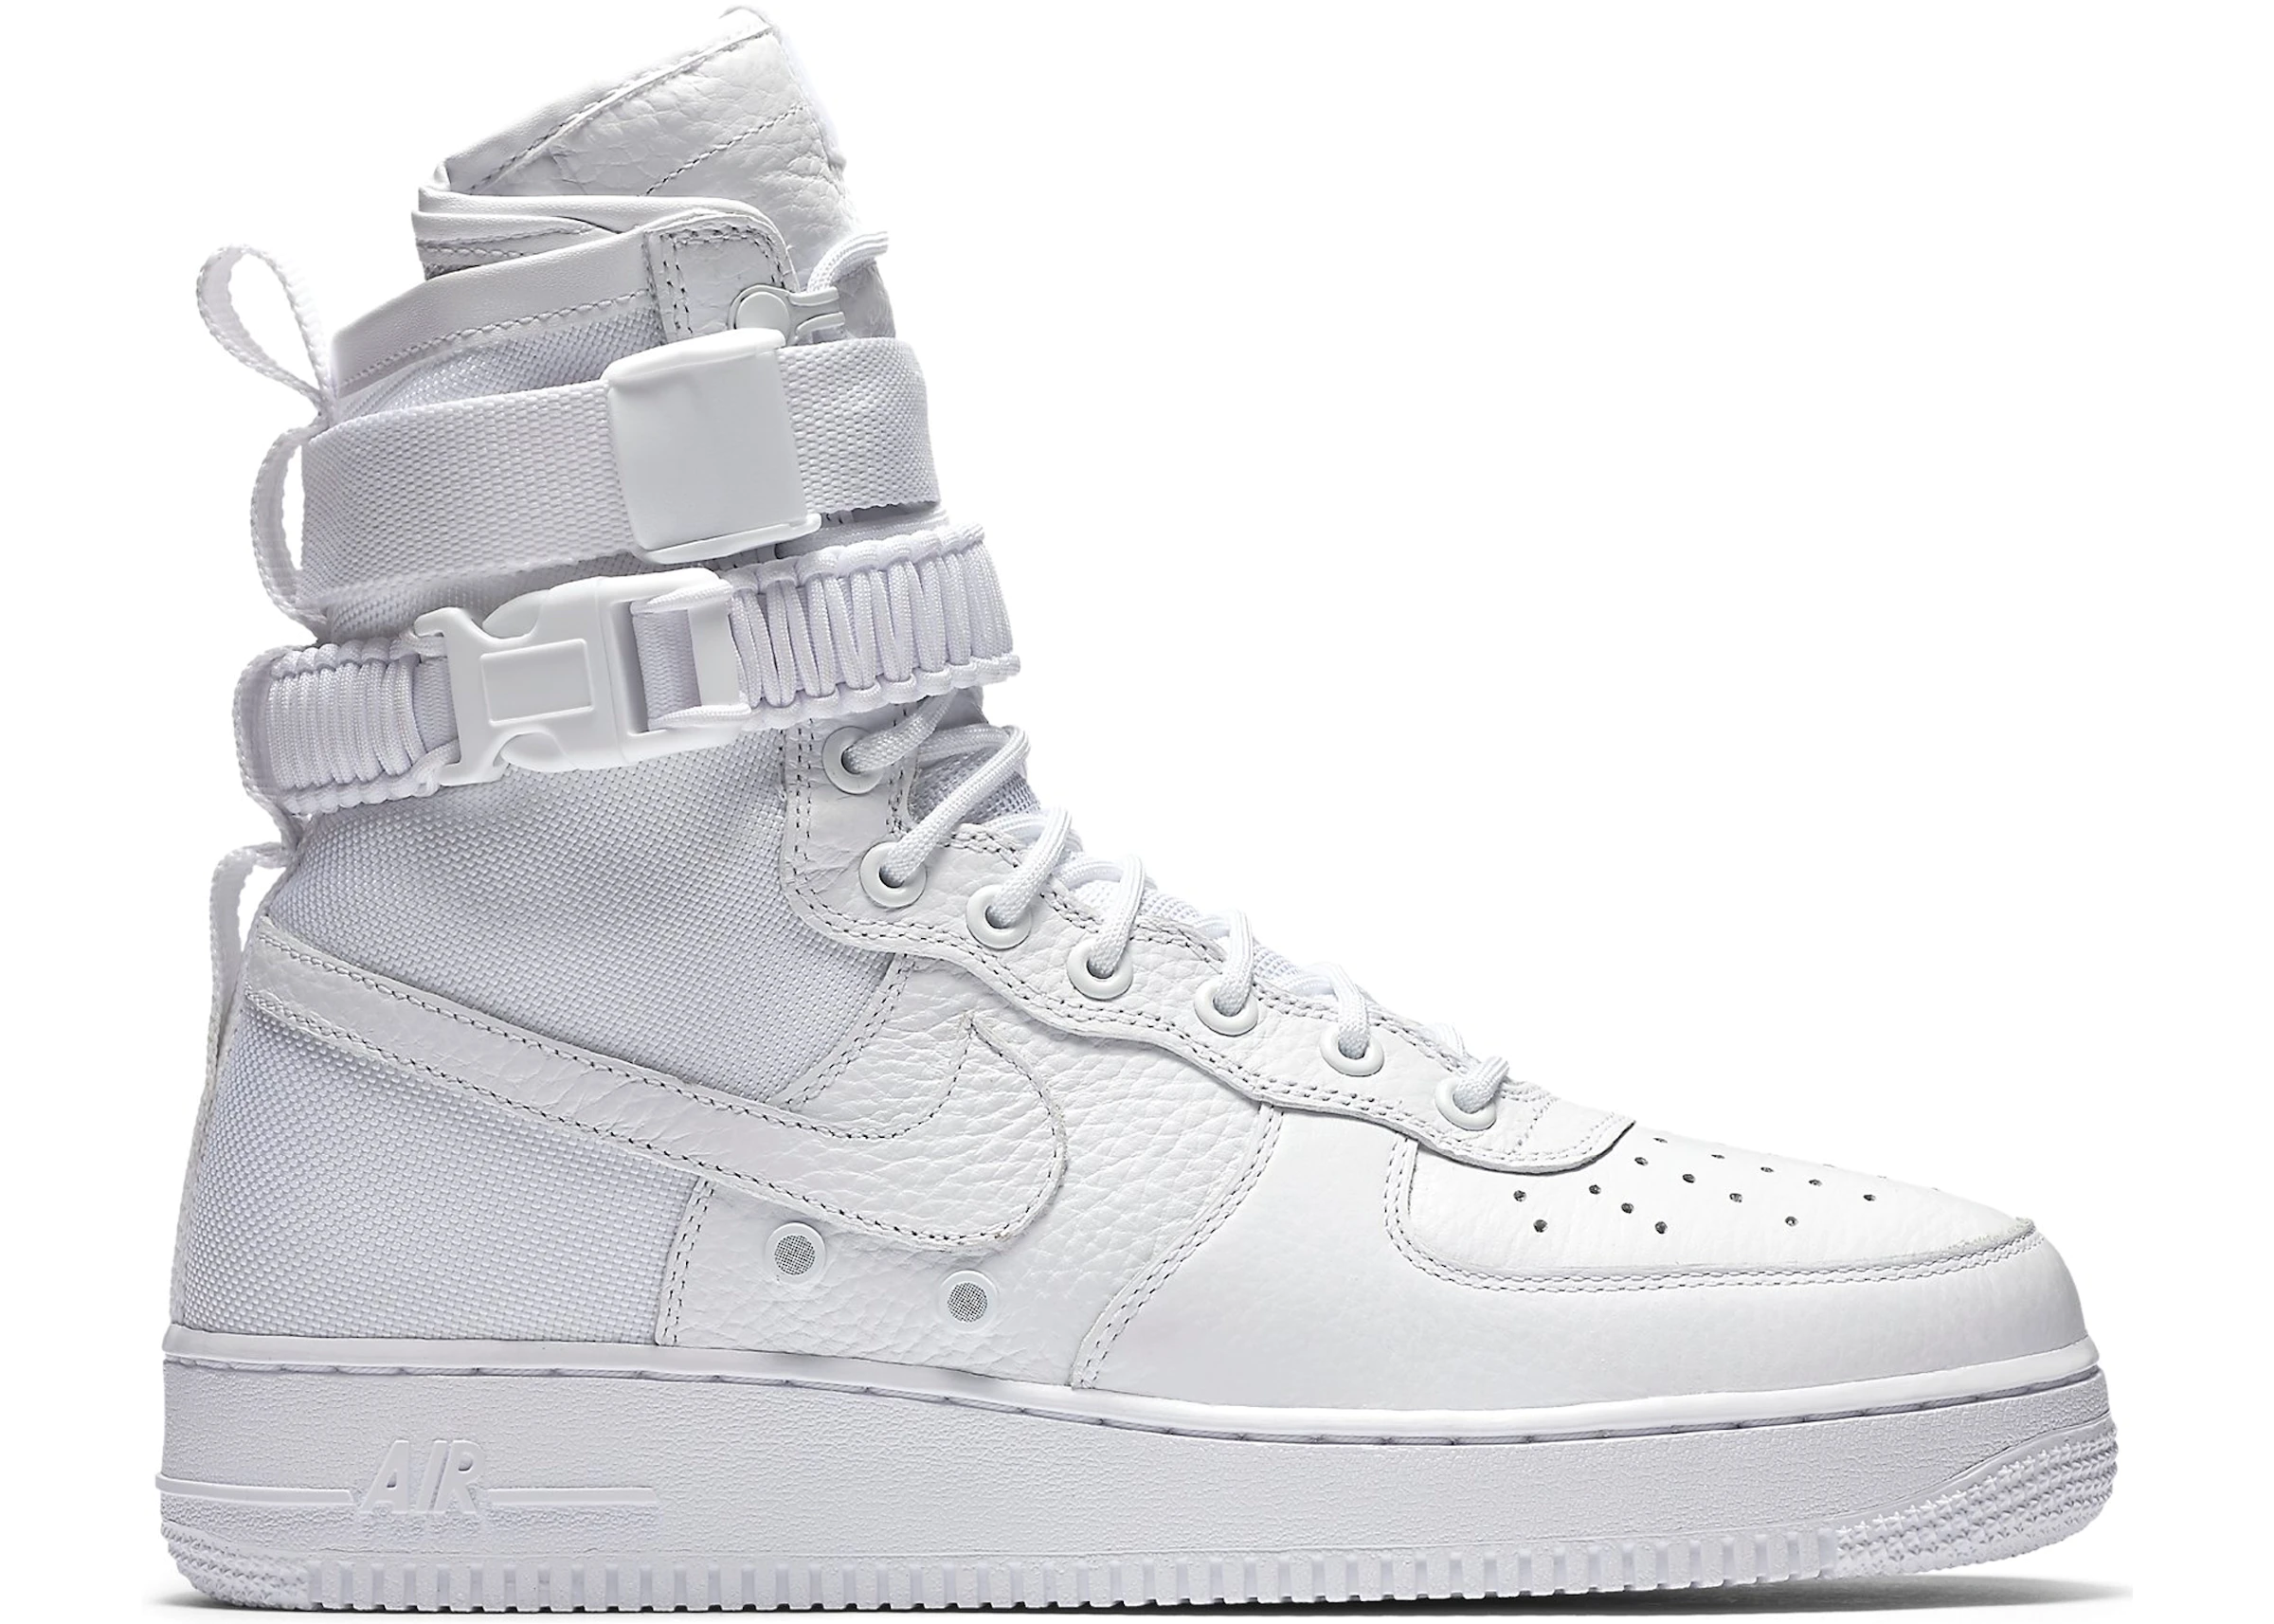 Reactor Hollywood delicate Nike SF Air Force 1 High White (2017) - 903270-100 - US